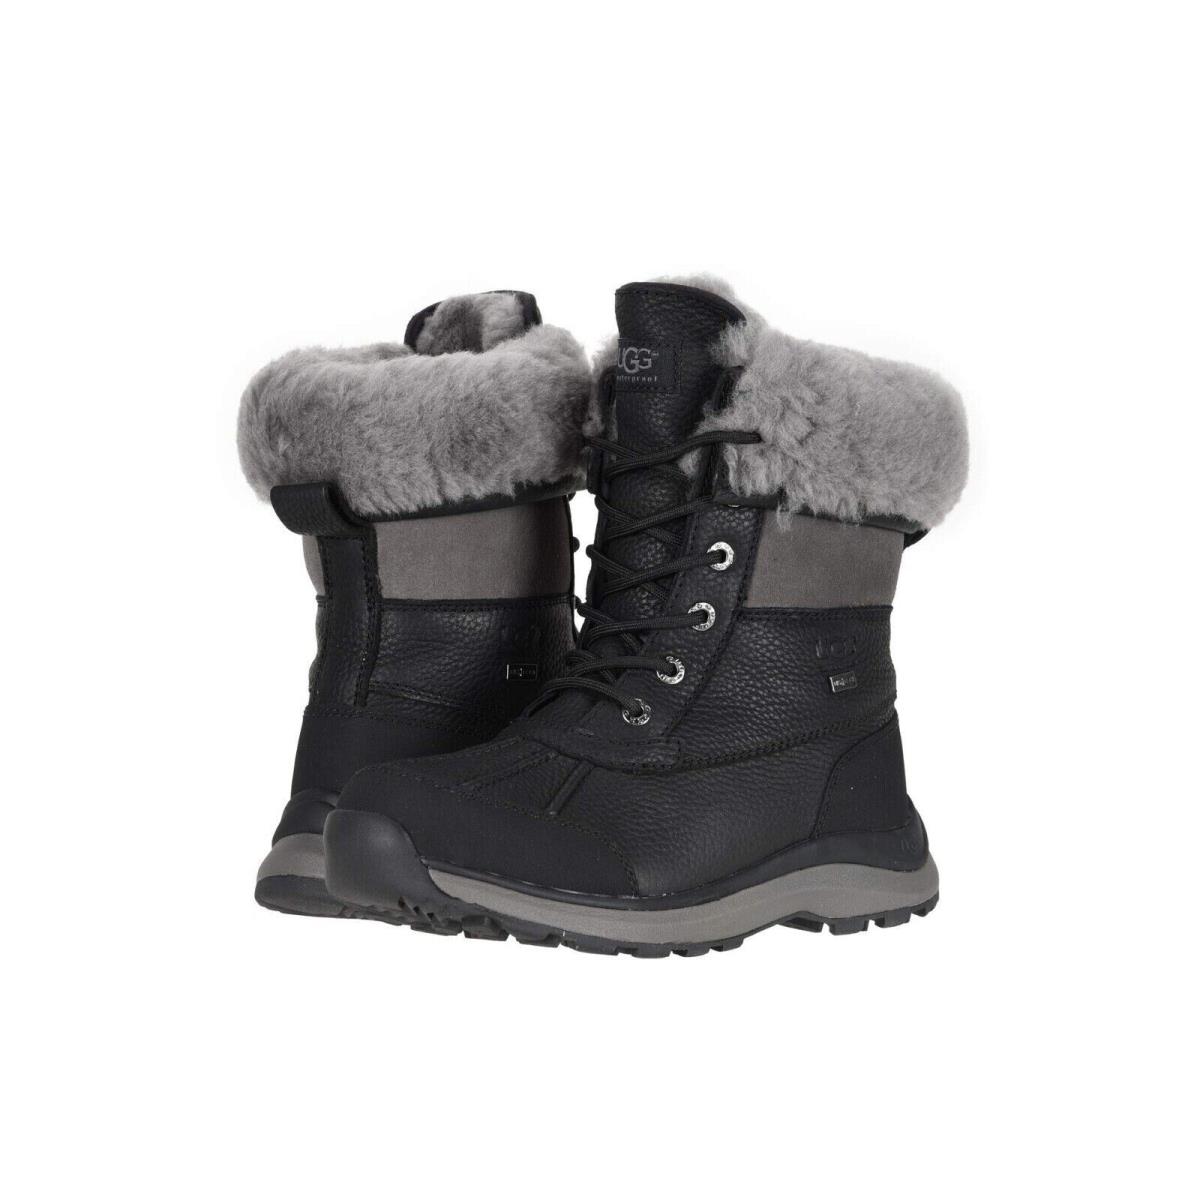 Women`s Shoes Ugg Adirondack Iii Leather/suede Winter Boots 1095141 Black 6.5/6 - Black